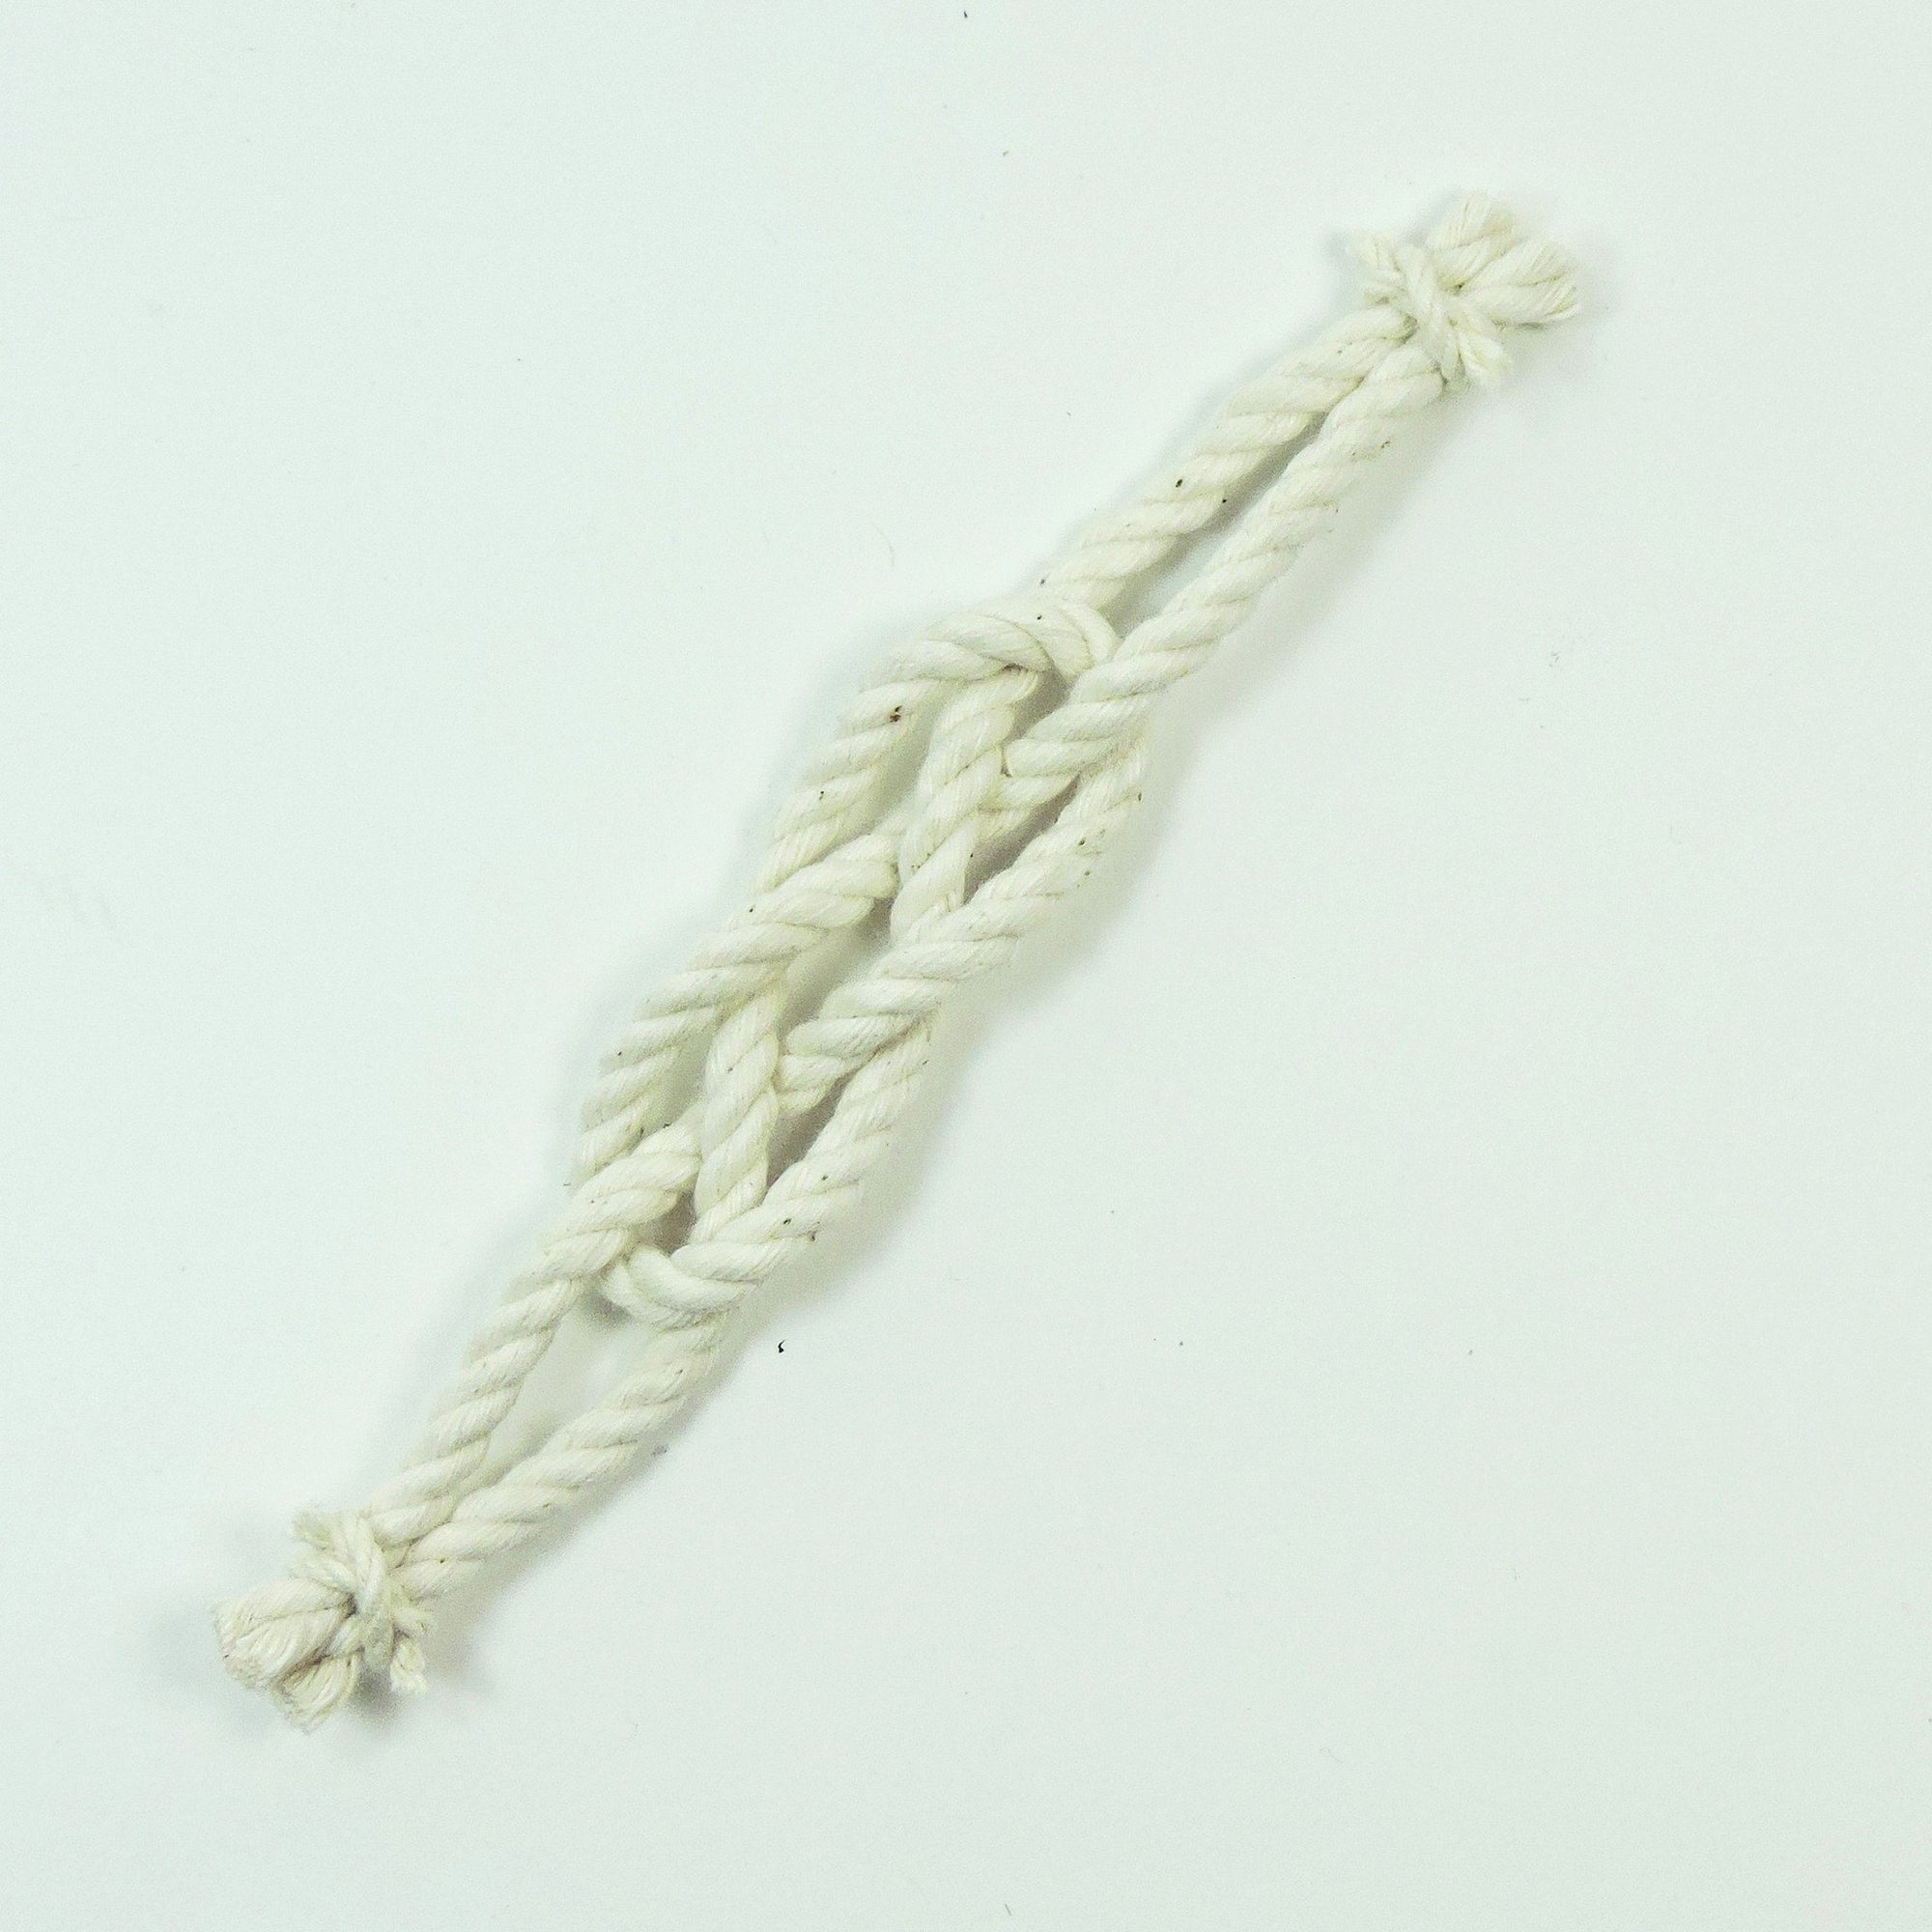 Nautical Knot Carrick Bend Boutonniere handmade at Mystic Knotwork